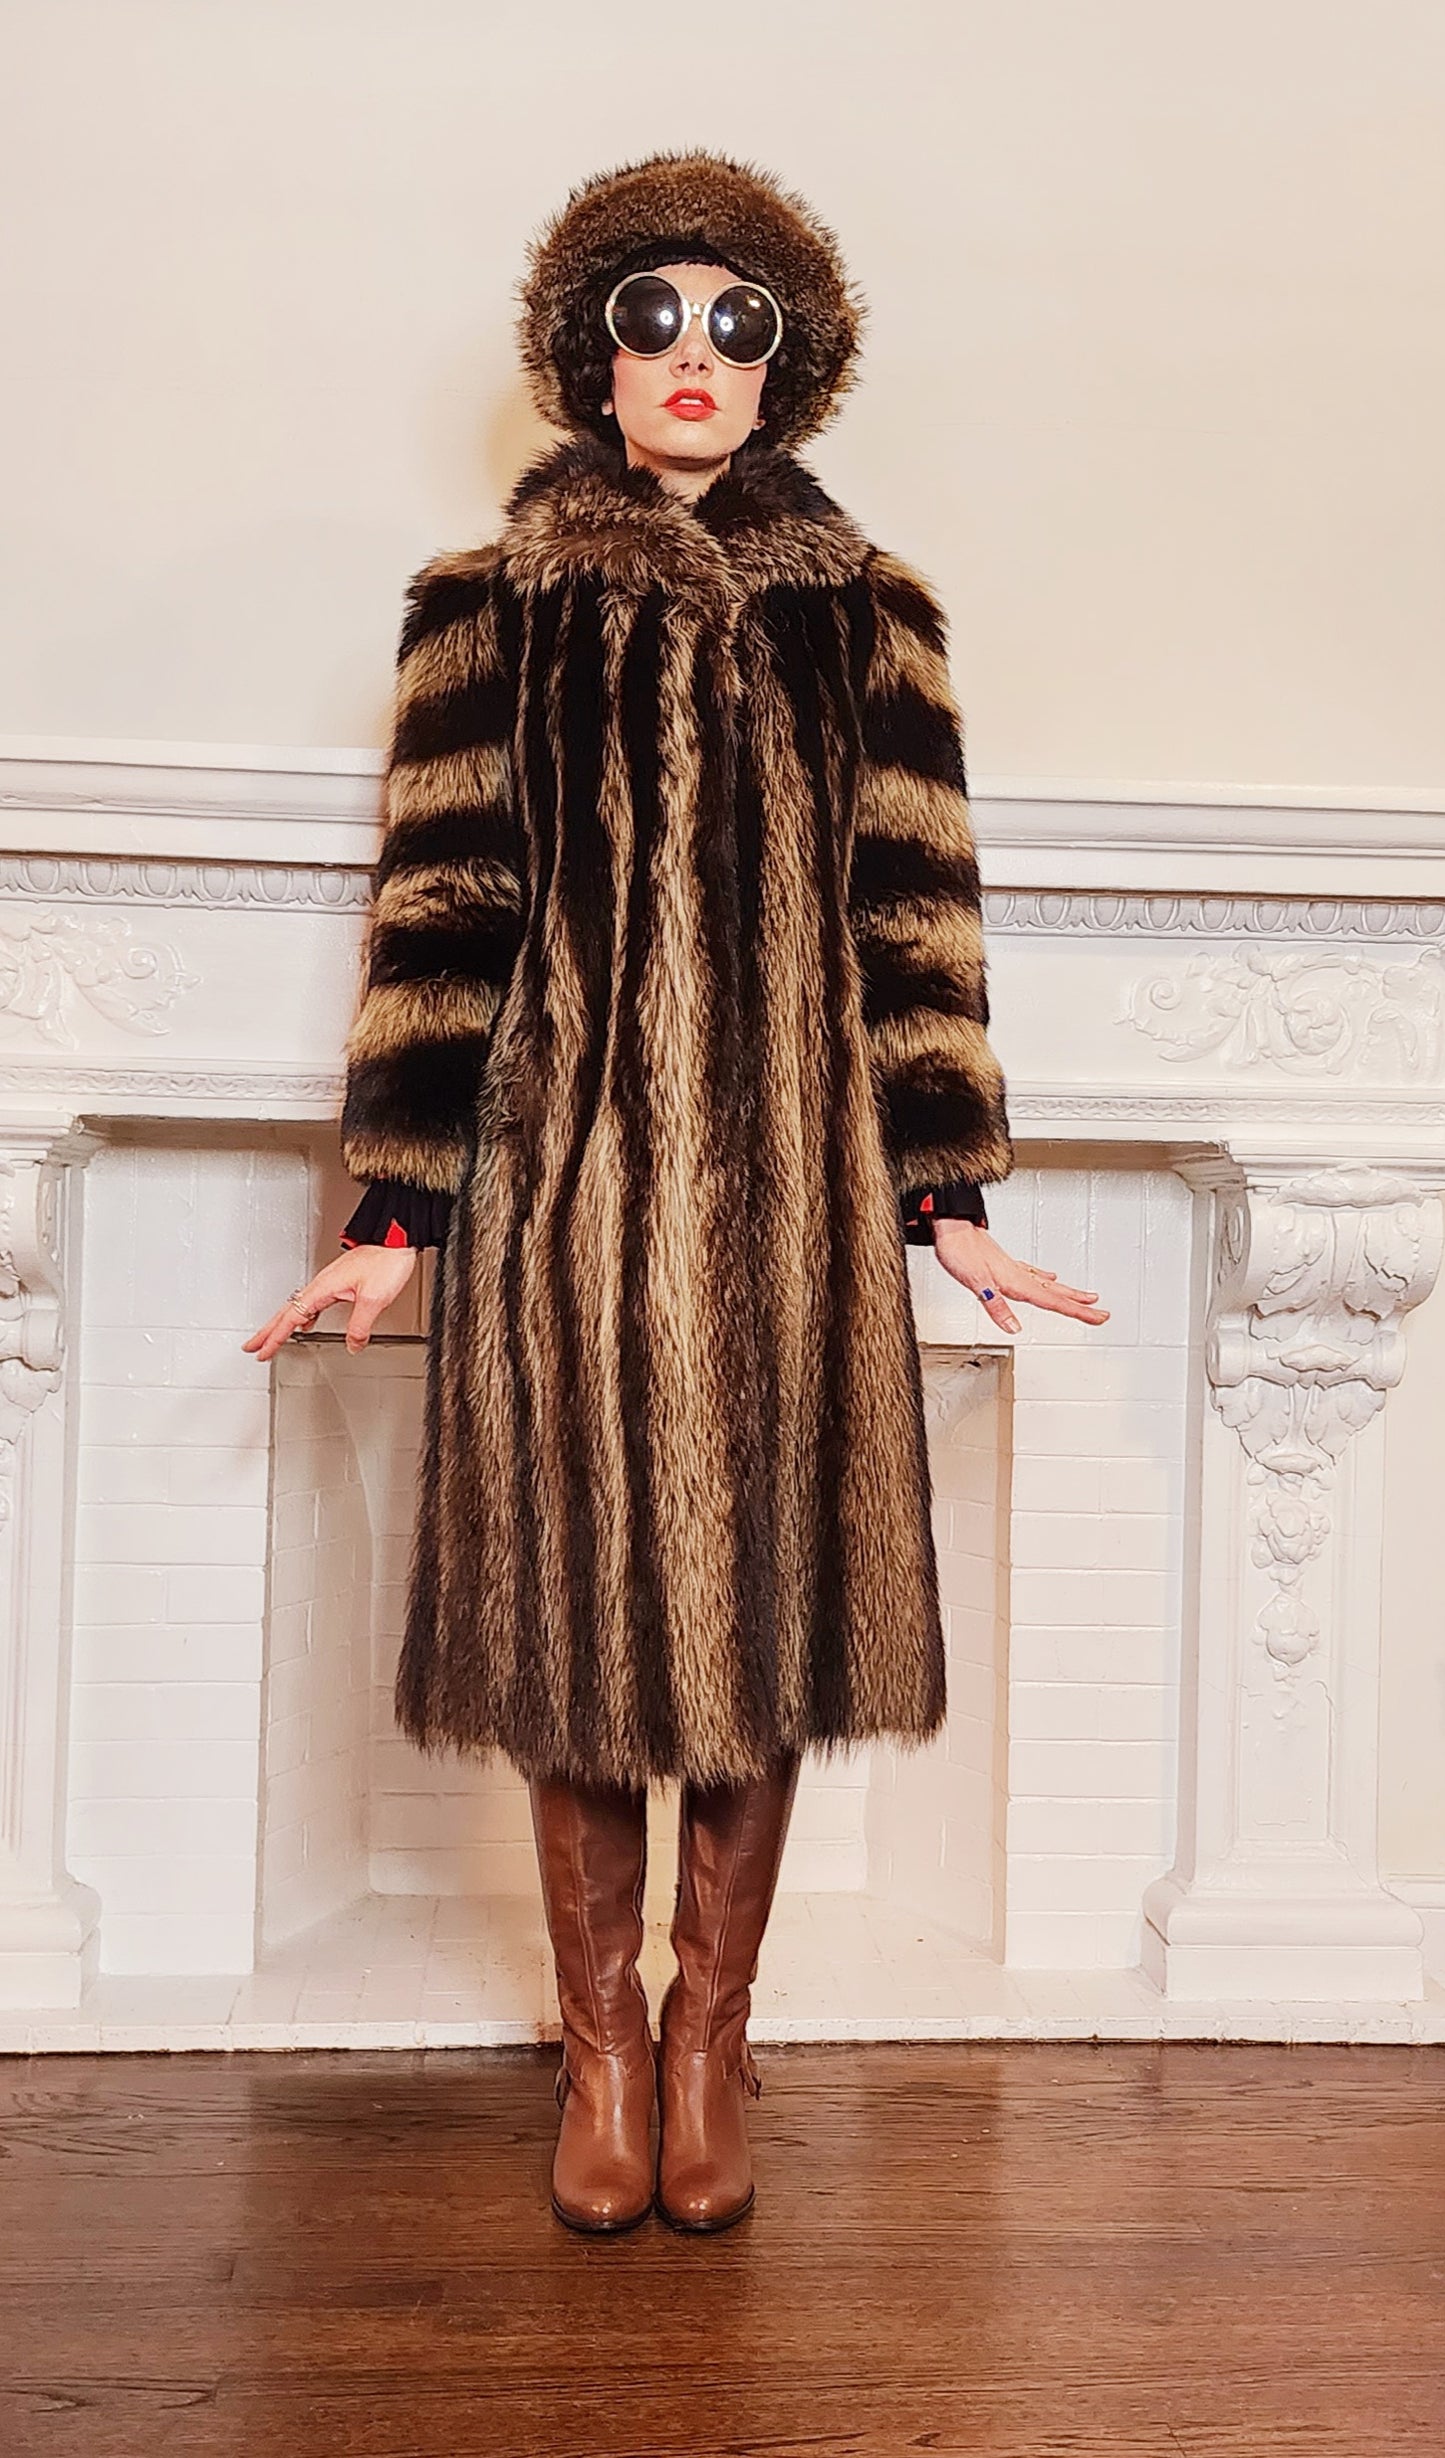 80s 70s Long Raccoon Fur Coat with Large Collar by Tibor Furs Small